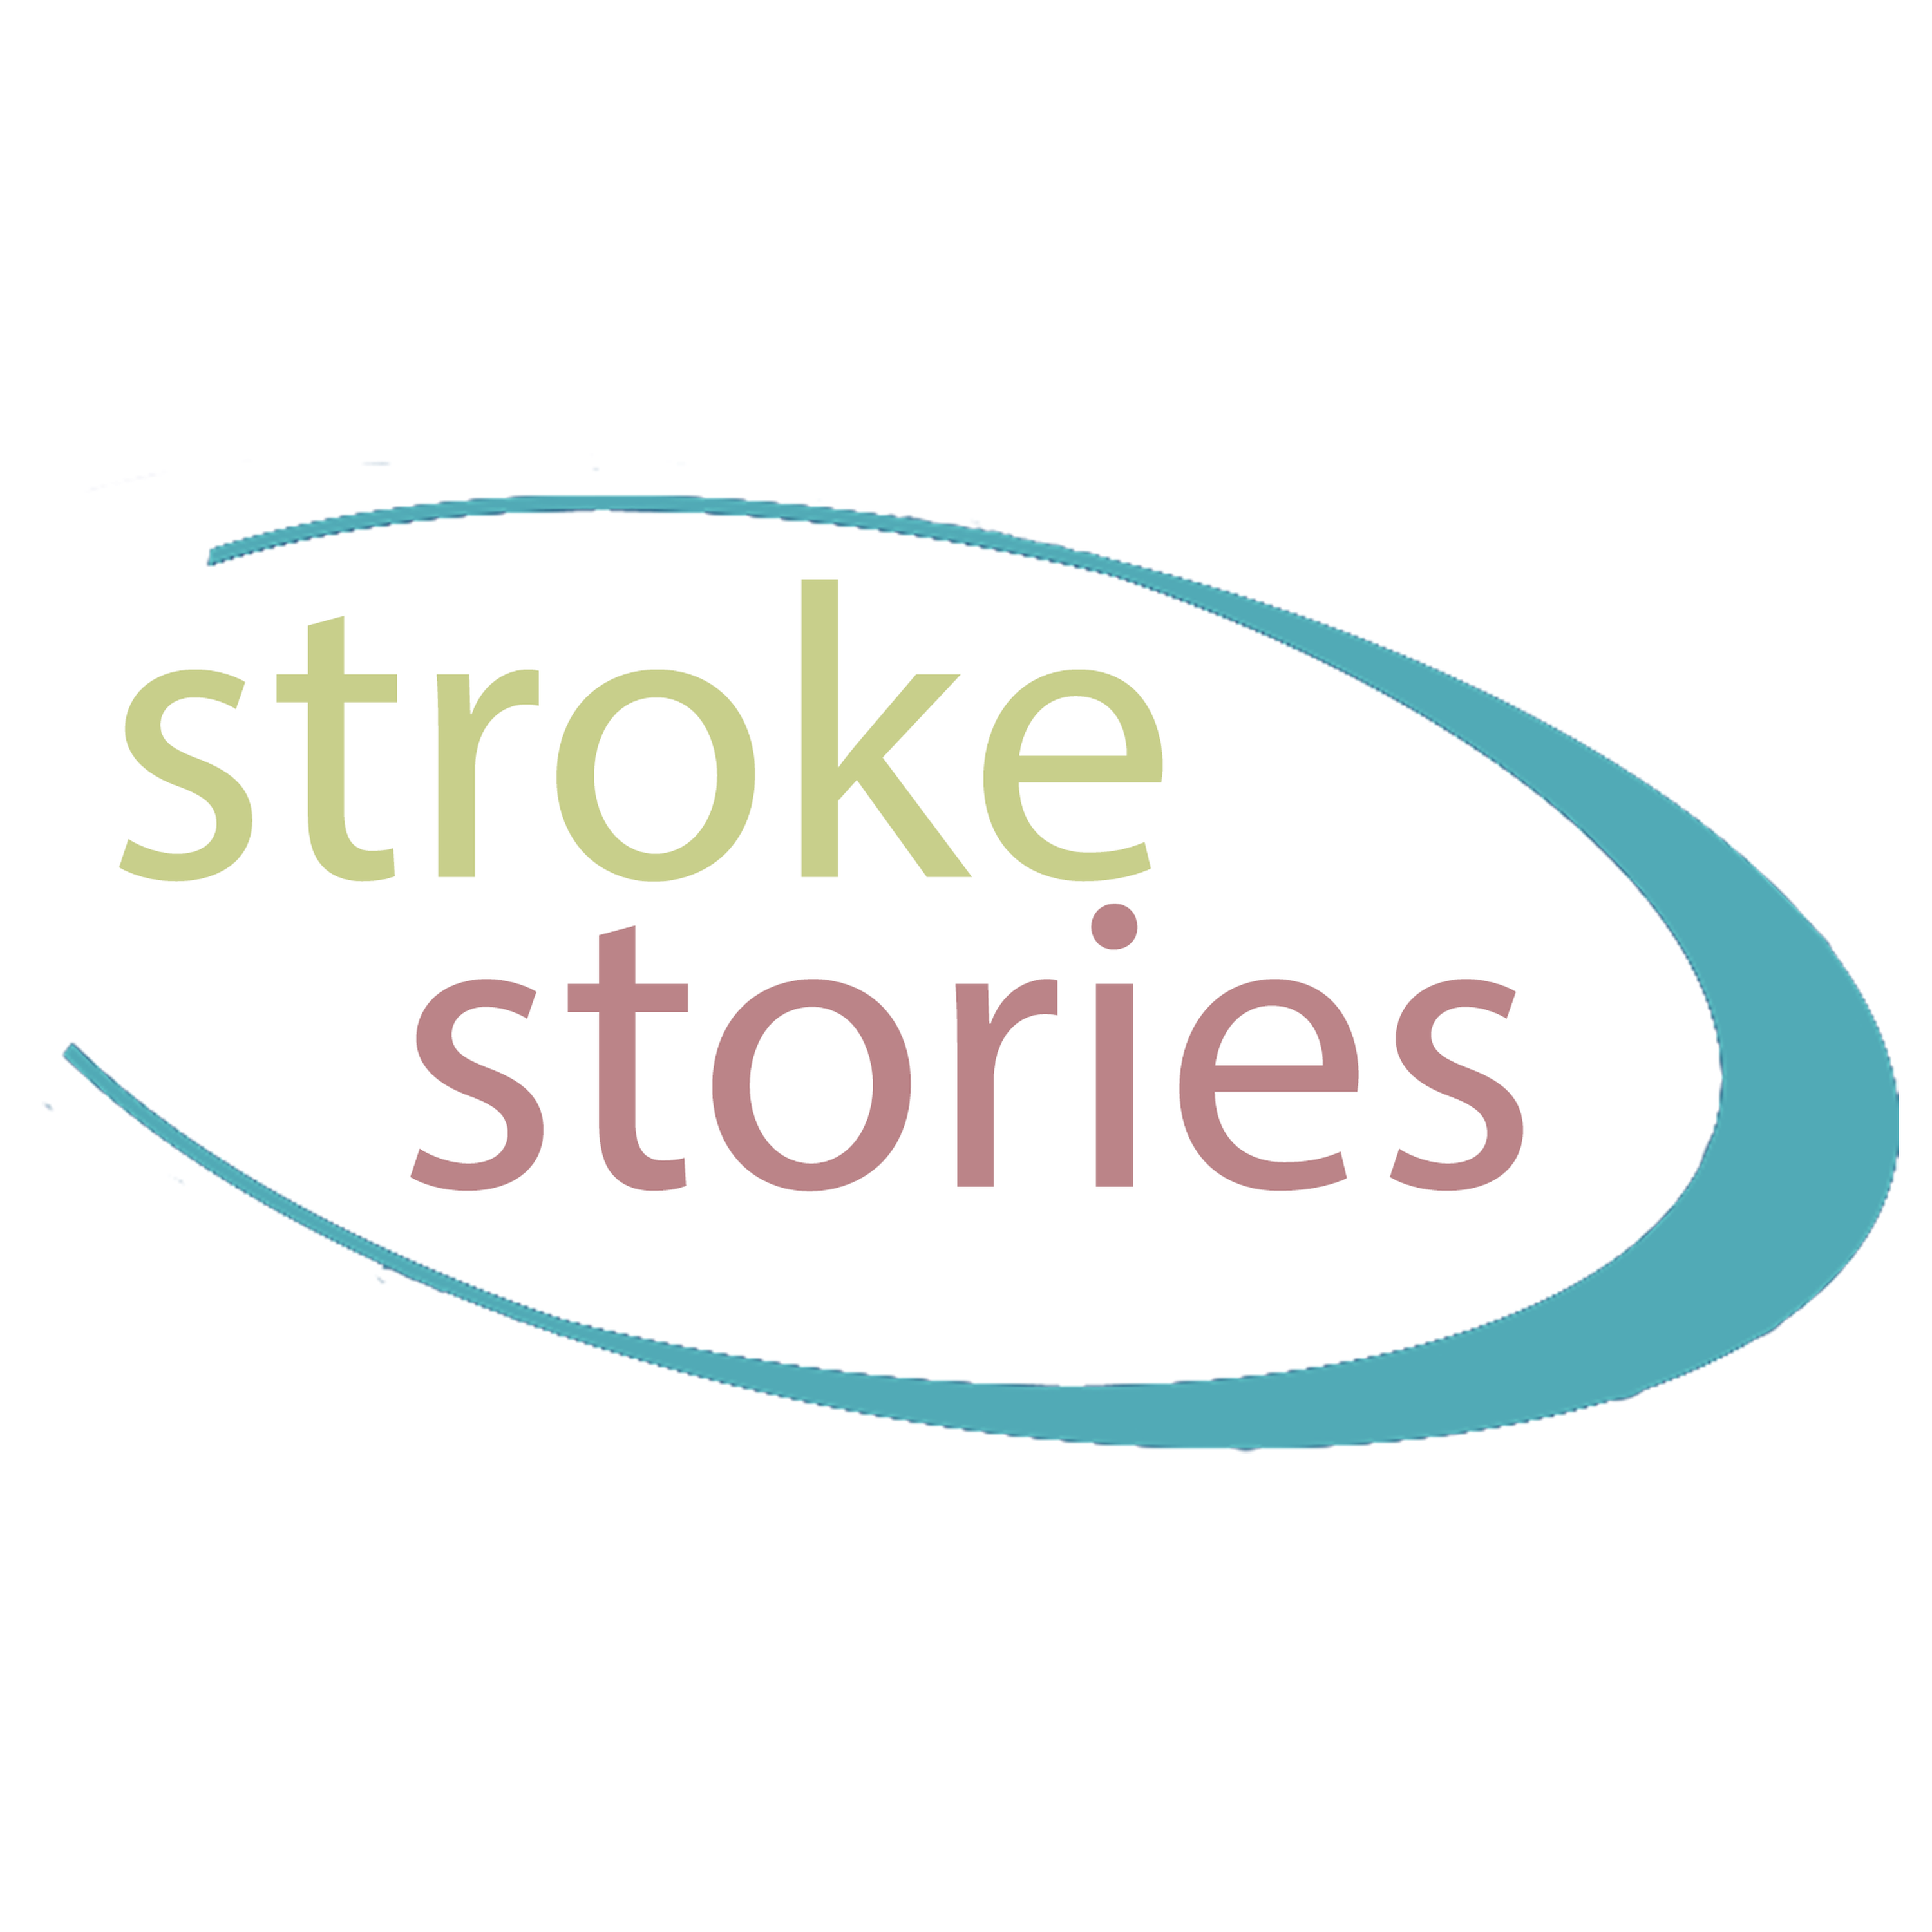 Stroke Stories Season 2 Episode 4 - Cary Timothy Hill